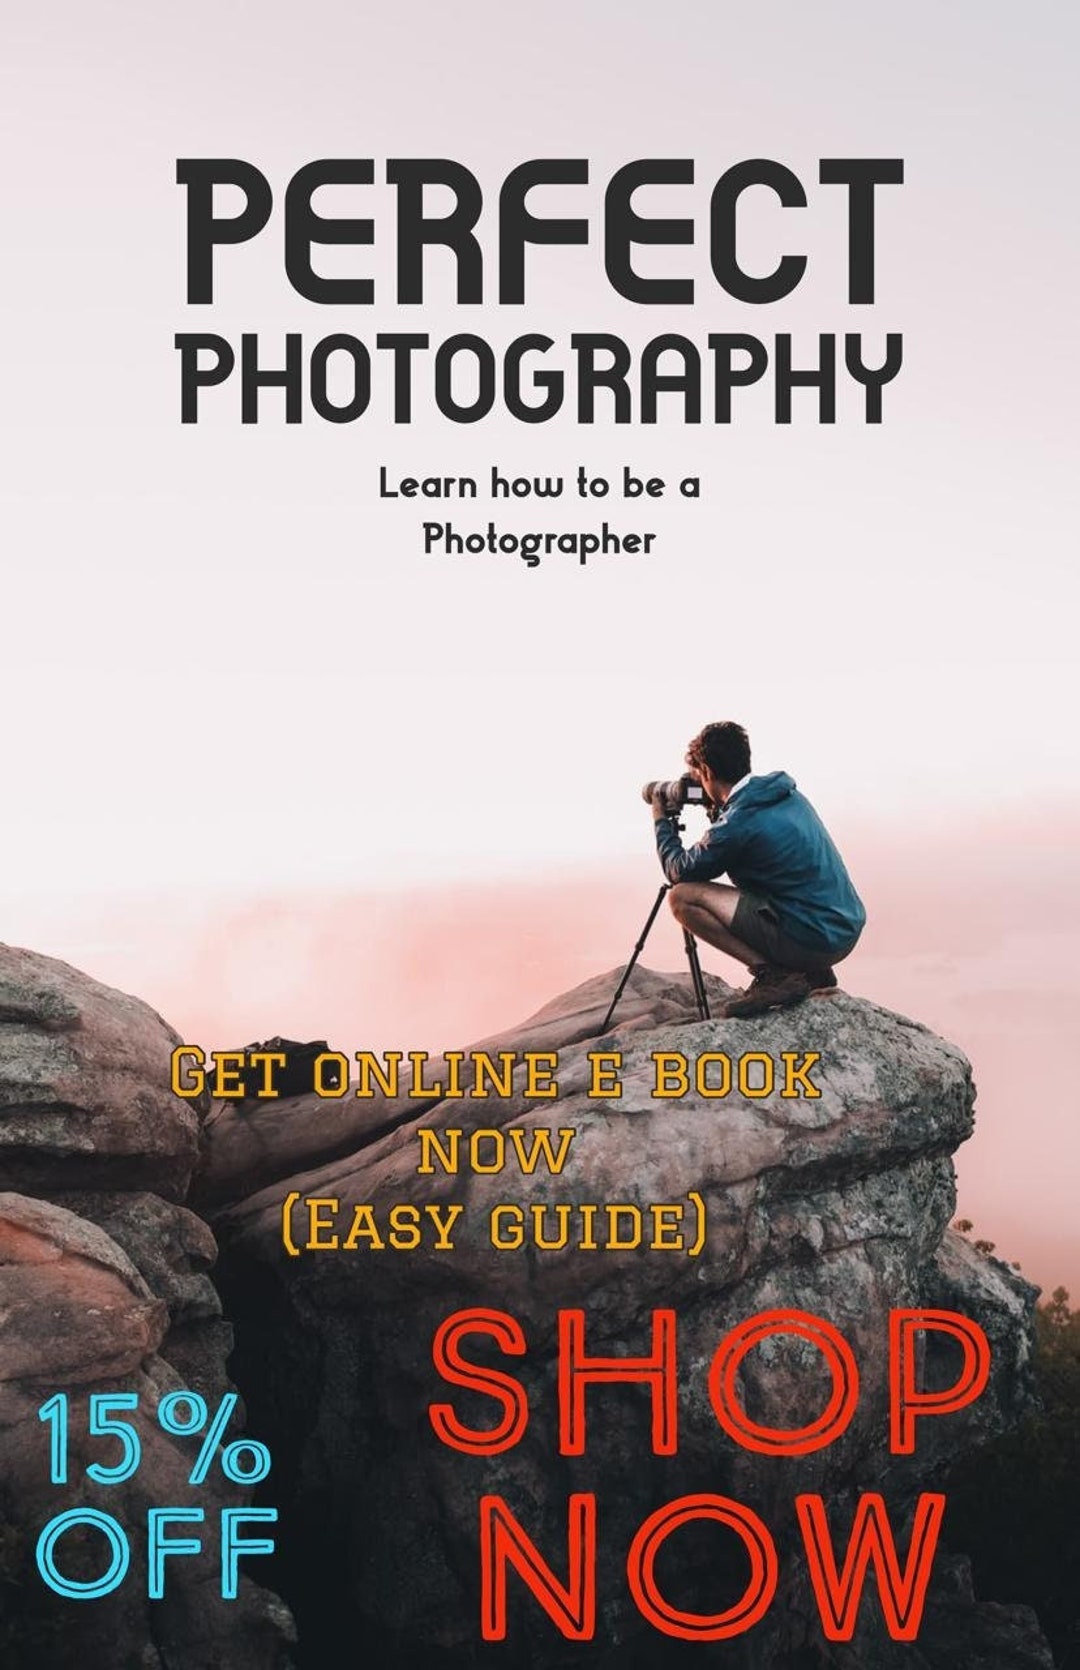 All You Need to Know Photography ecourses beginner Film